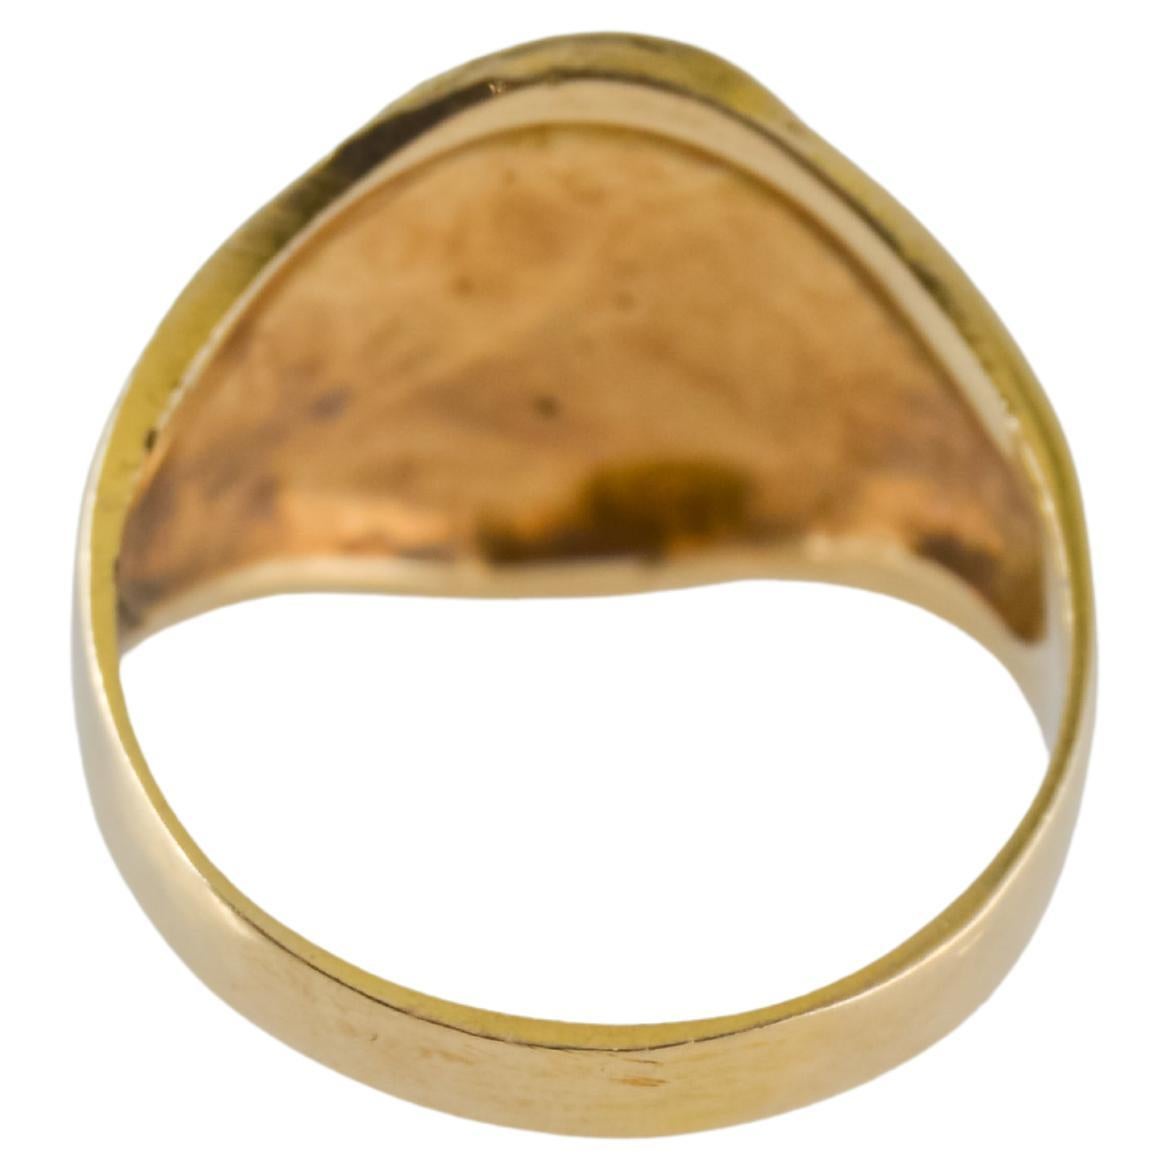 Art Deco 10 Karat Yellow Gold Signet Ring Sized to 6 1/2, 1930s, Hand Made In Good Condition For Sale In Long Beach, CA